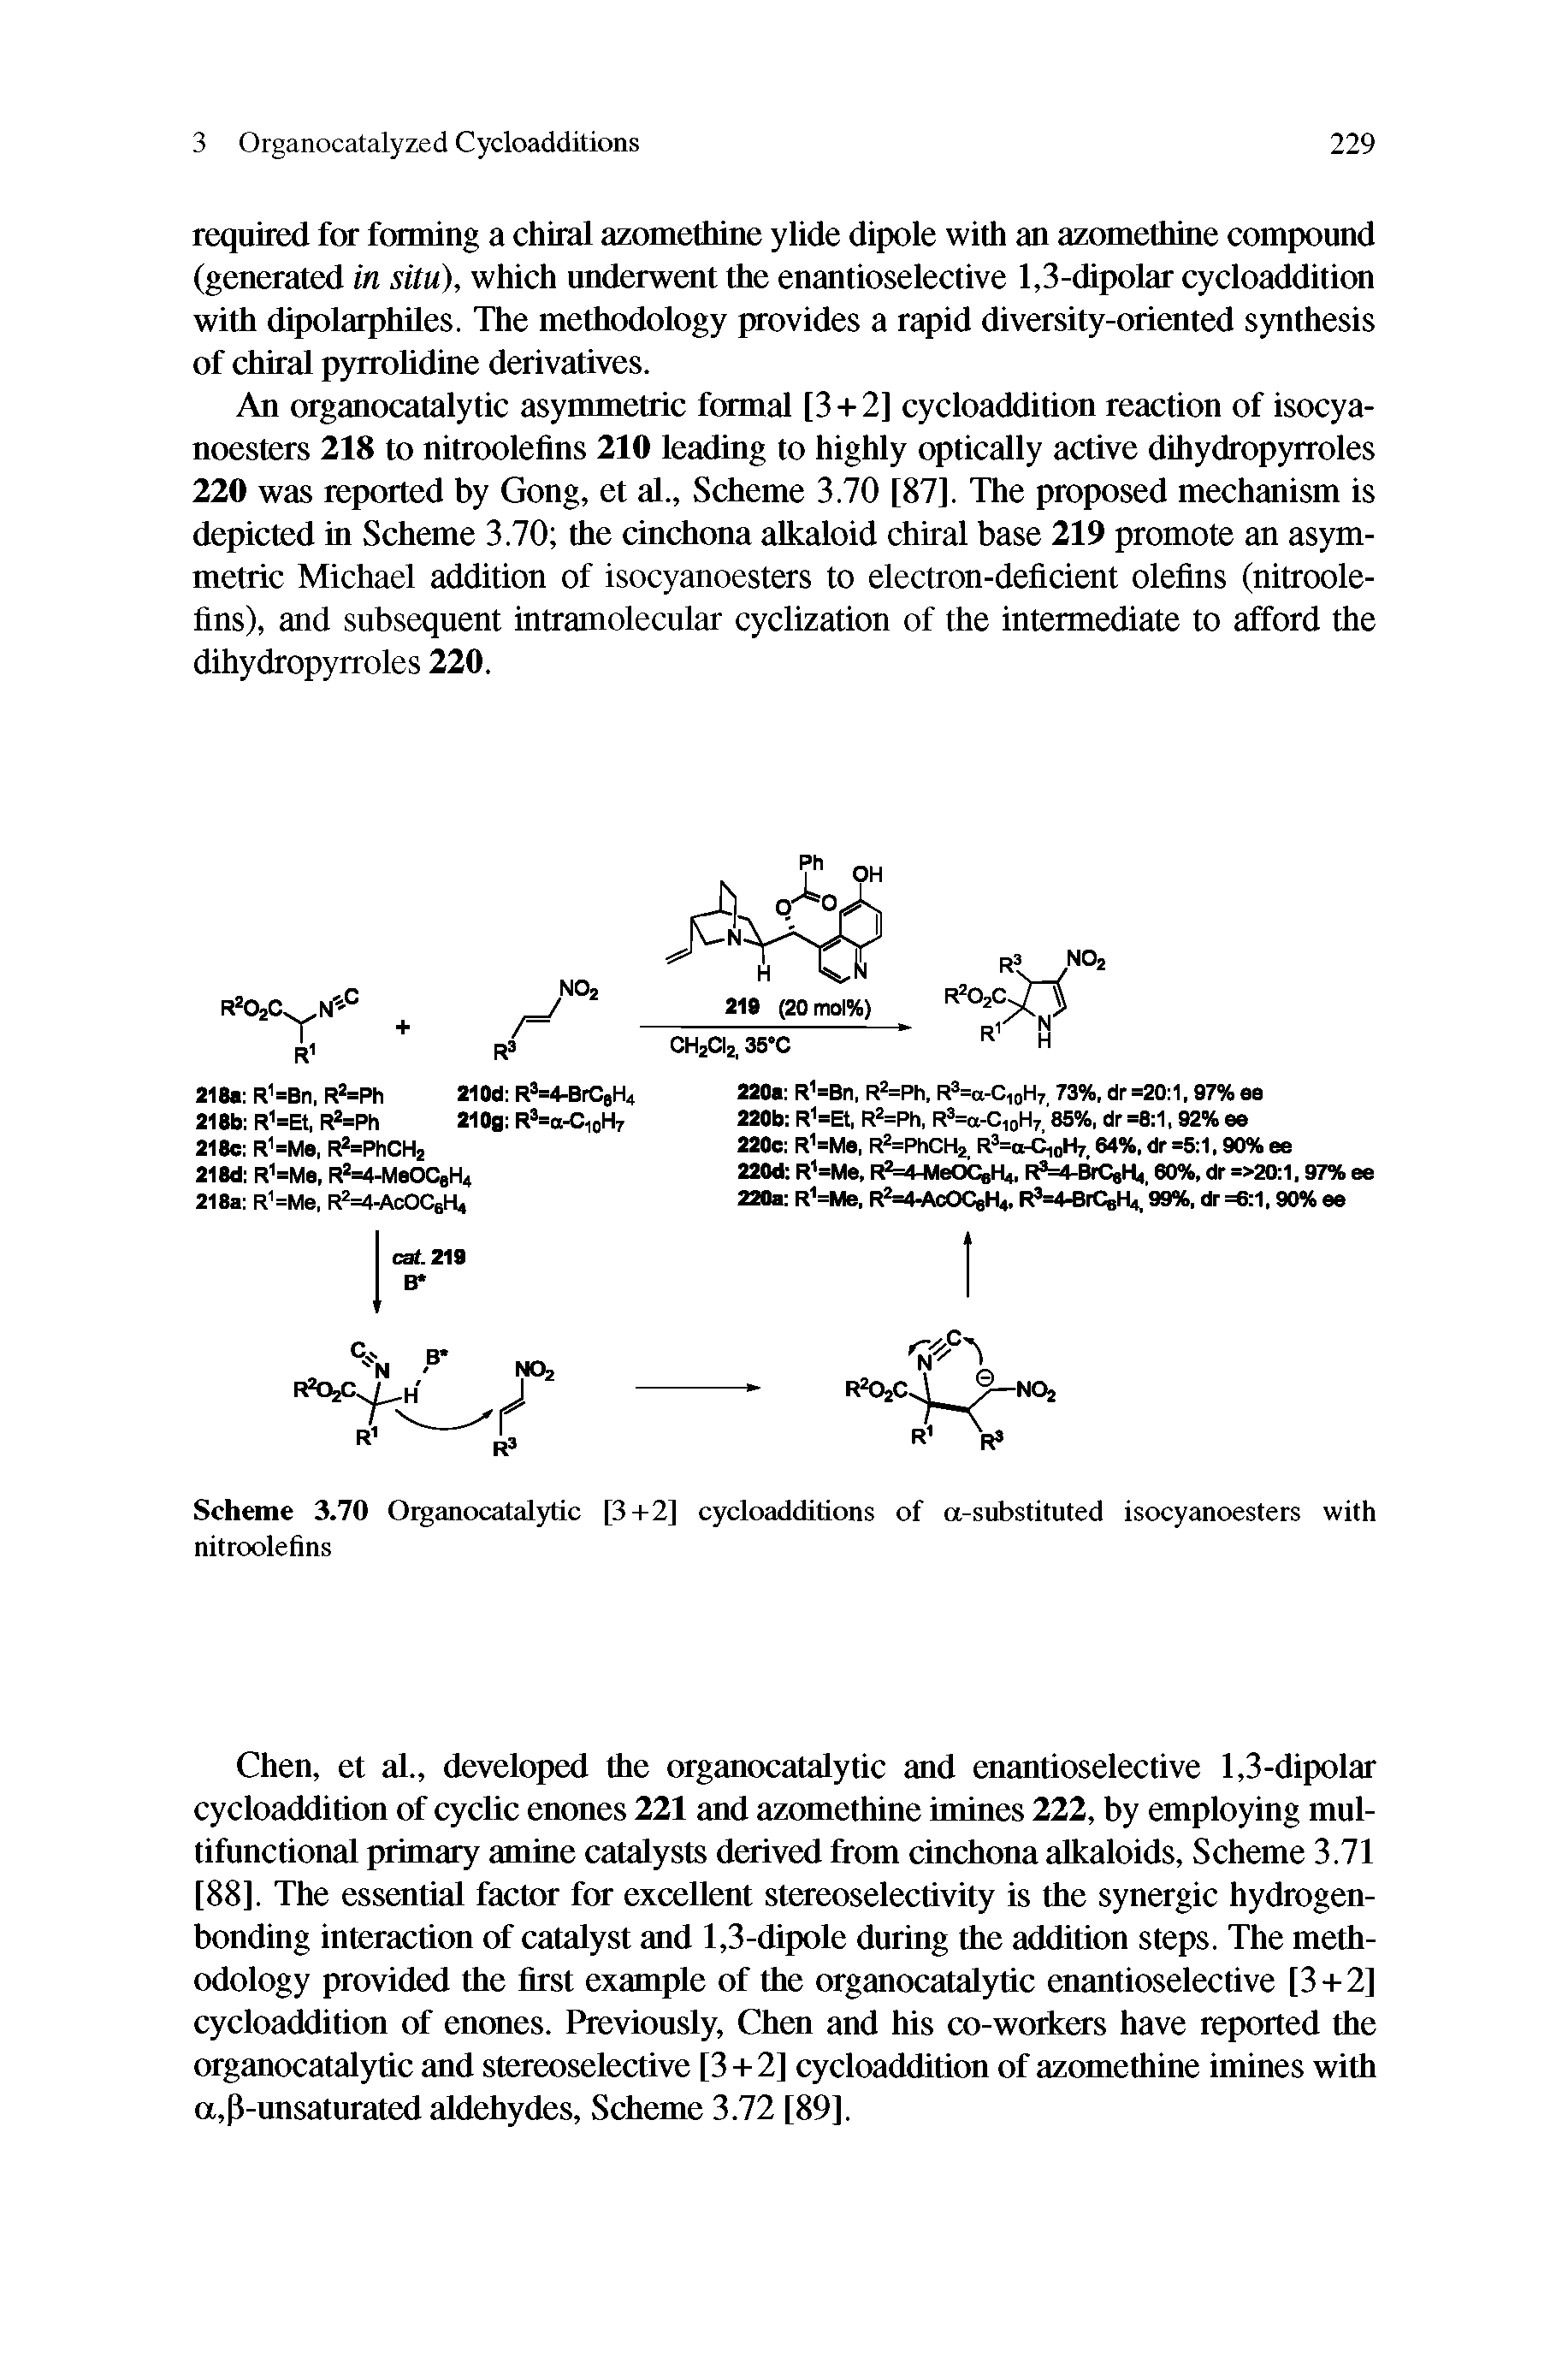 Scheme 3.70 Organocatalytic [3+2] cycloadditions of a-substituted isocyanoesters with nitroolefins...